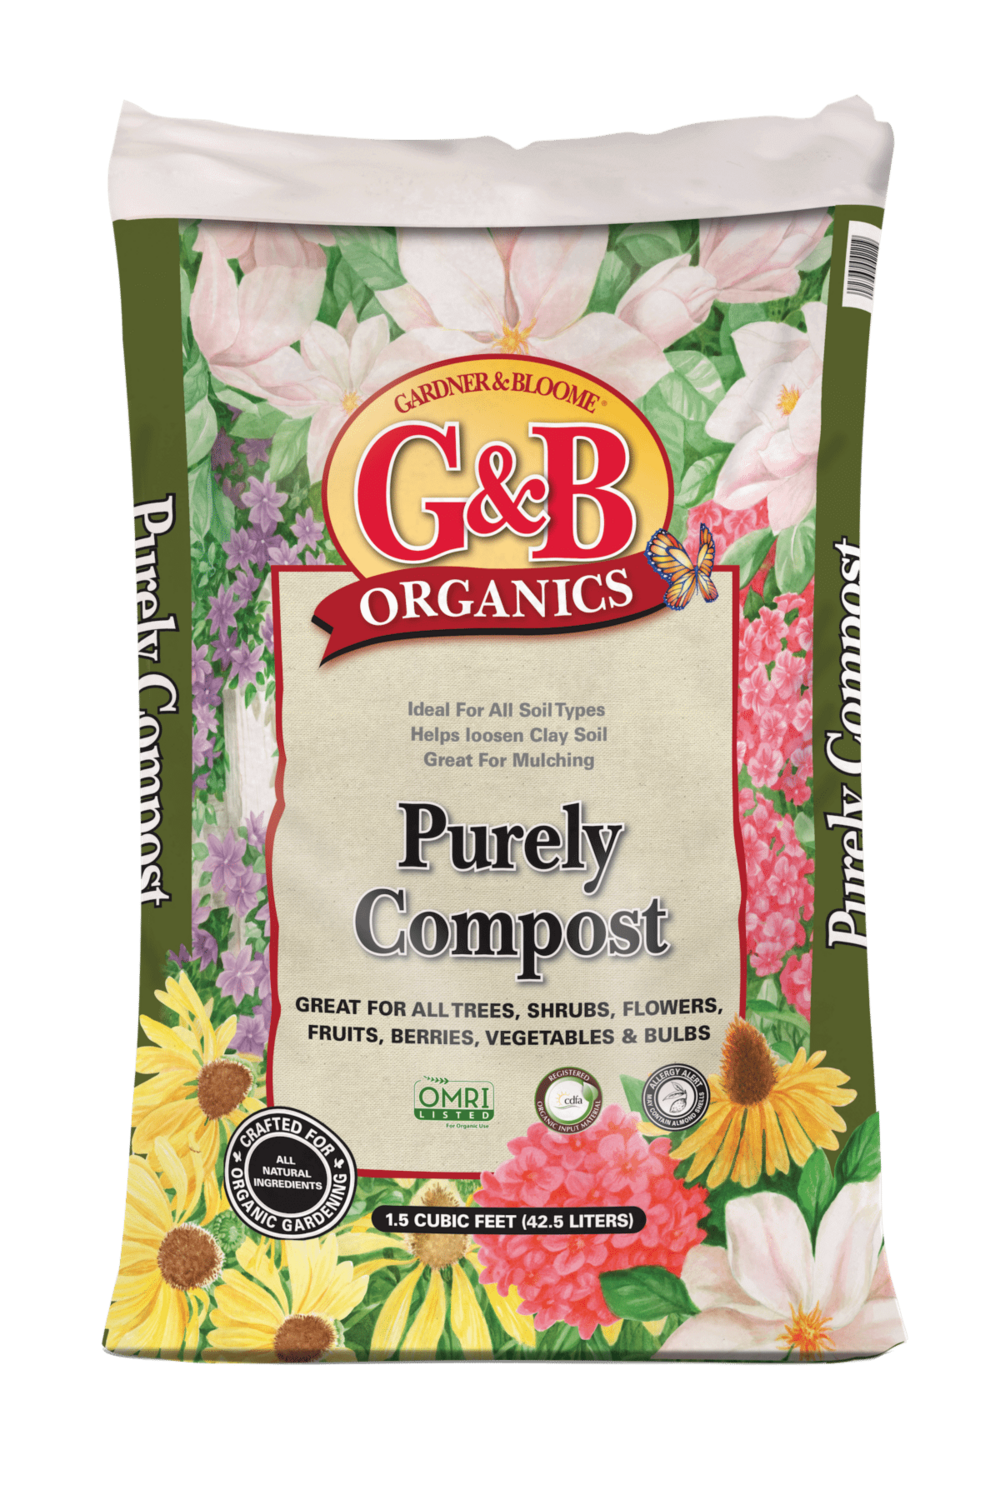 G&B Purely Compost 1.5 CF